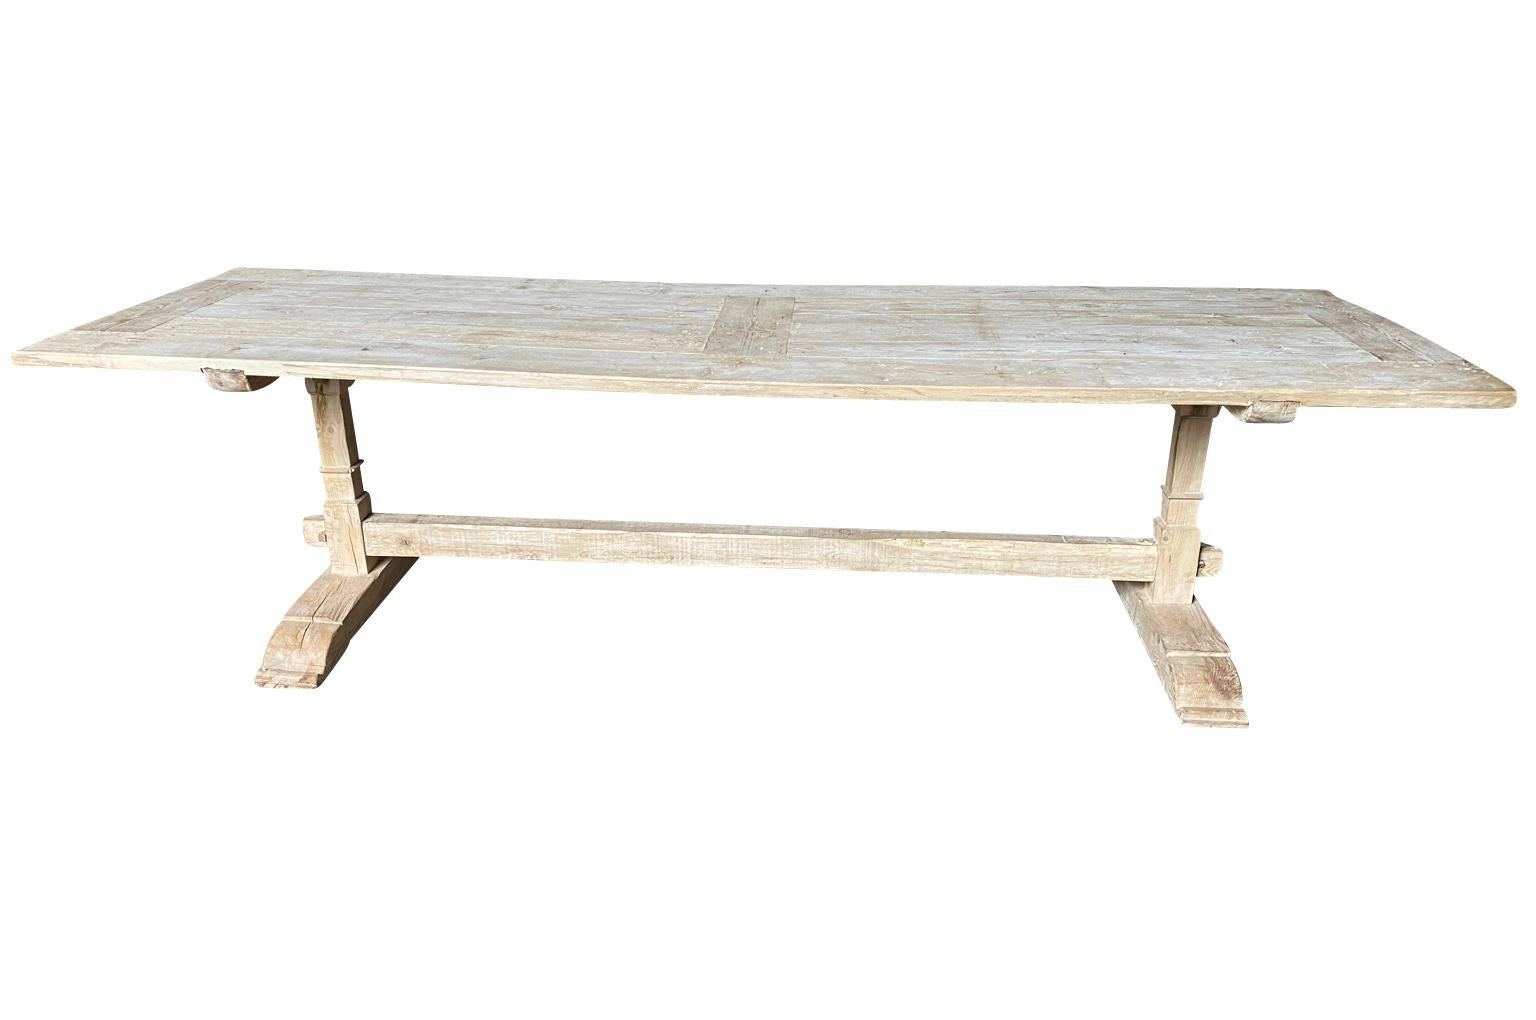 A very charming 17th century style Farm House - Trestle Table from Portugal.  Soundly constructed from pine.  A wonderful table for large family gatherings.